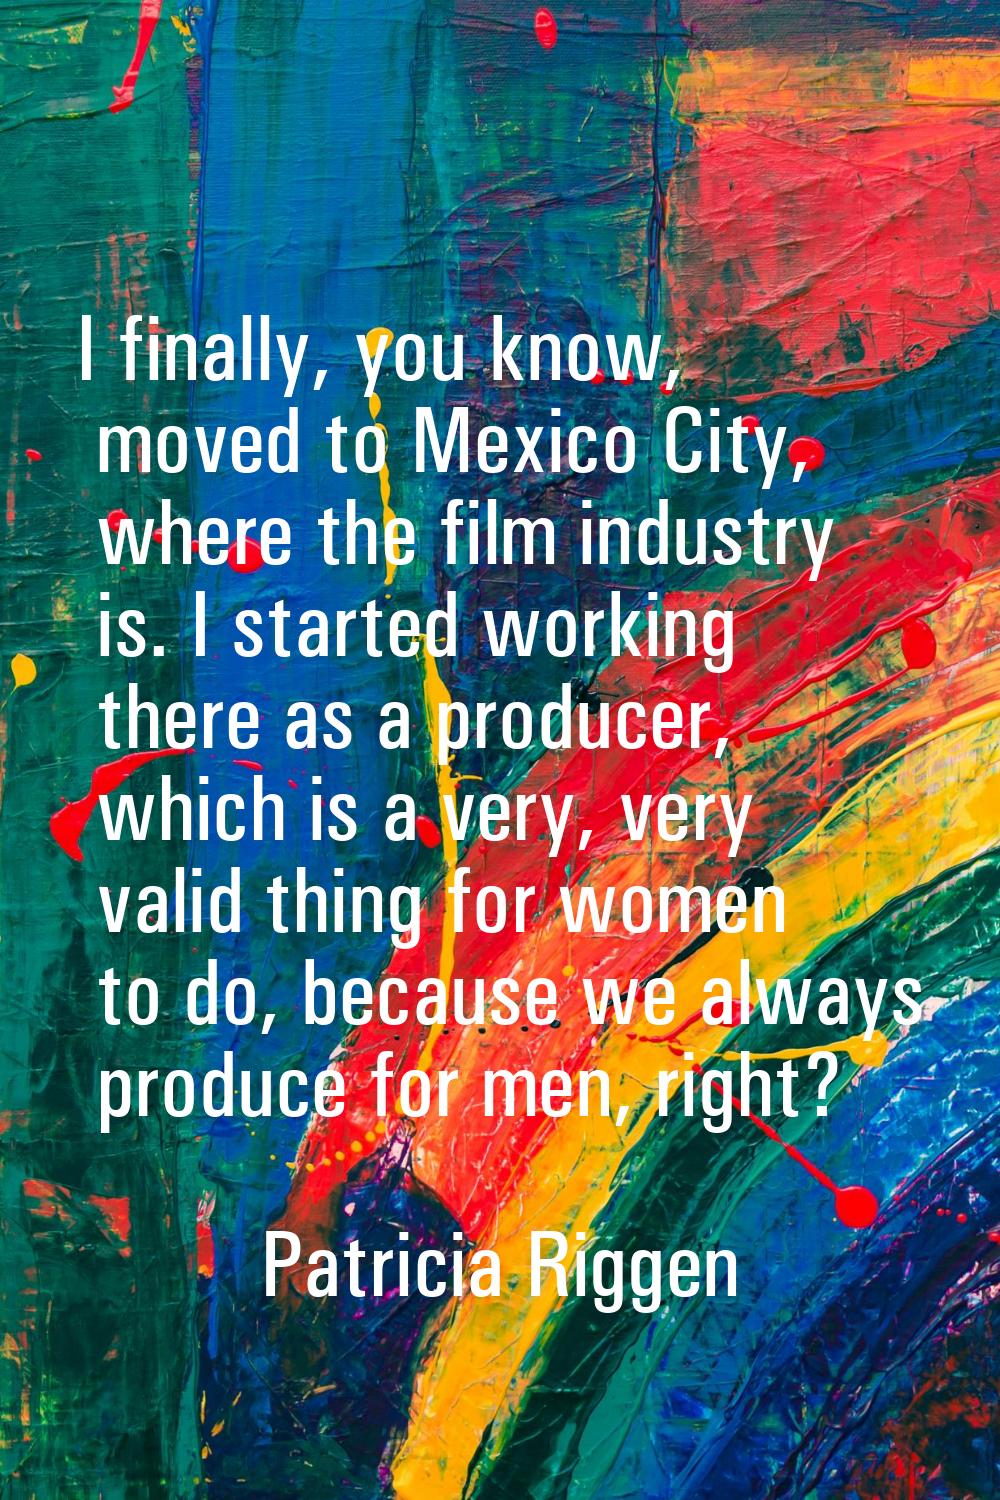 I finally, you know, moved to Mexico City, where the film industry is. I started working there as a